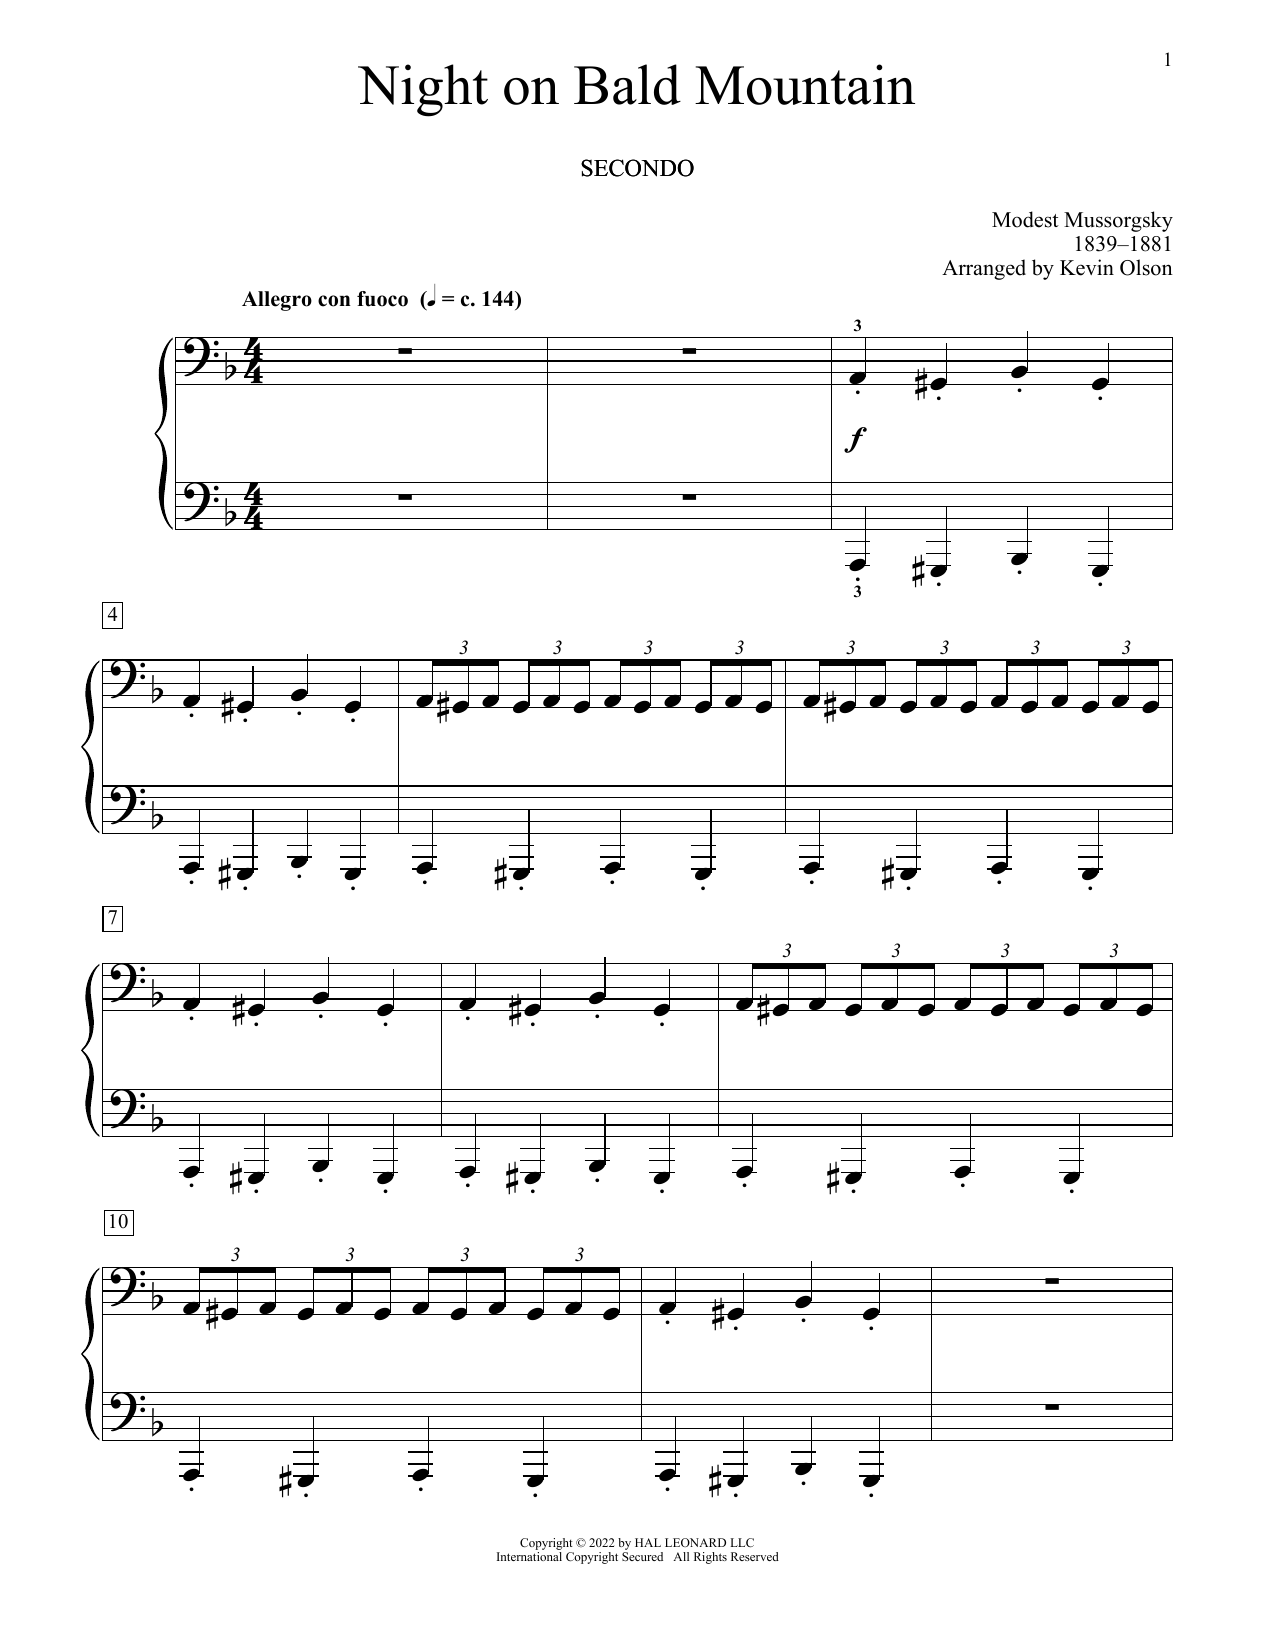 Download Modest Mussorgsky Night On Bald Mountain (arr. Kevin Olso Sheet Music